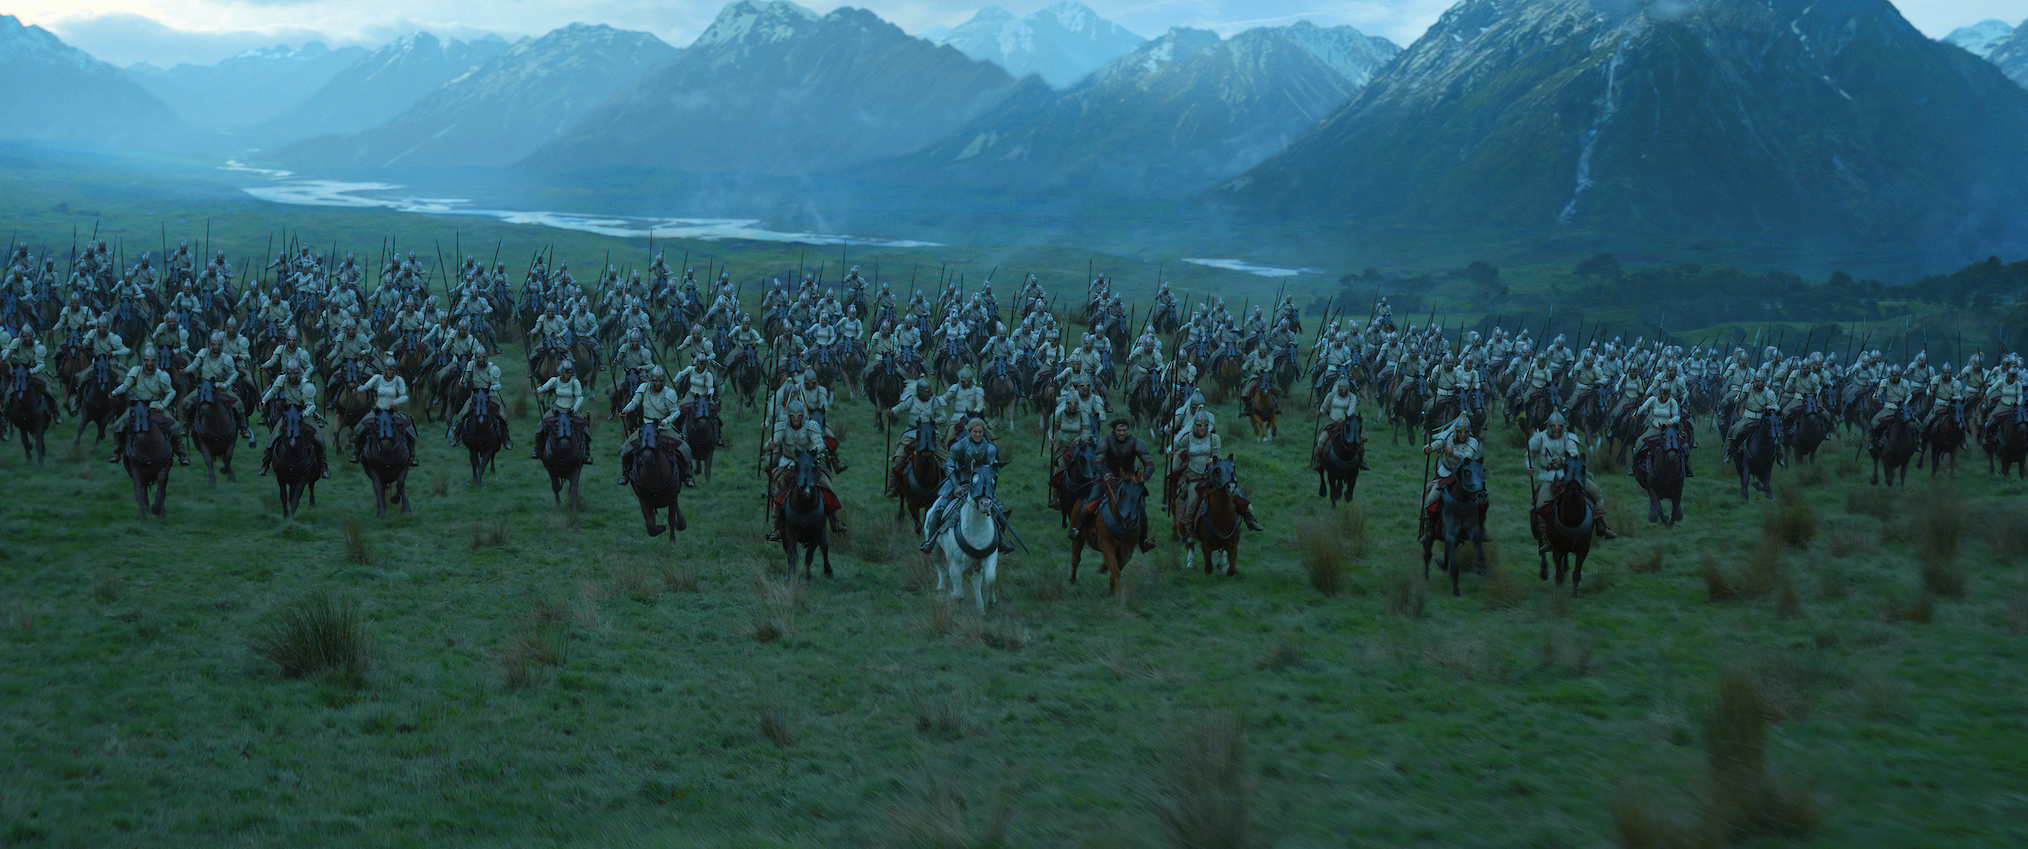 Morfydd Clark as Galadriel in front of the Numenor army in The Lord of the Rings: The Rings of Power Episode 6